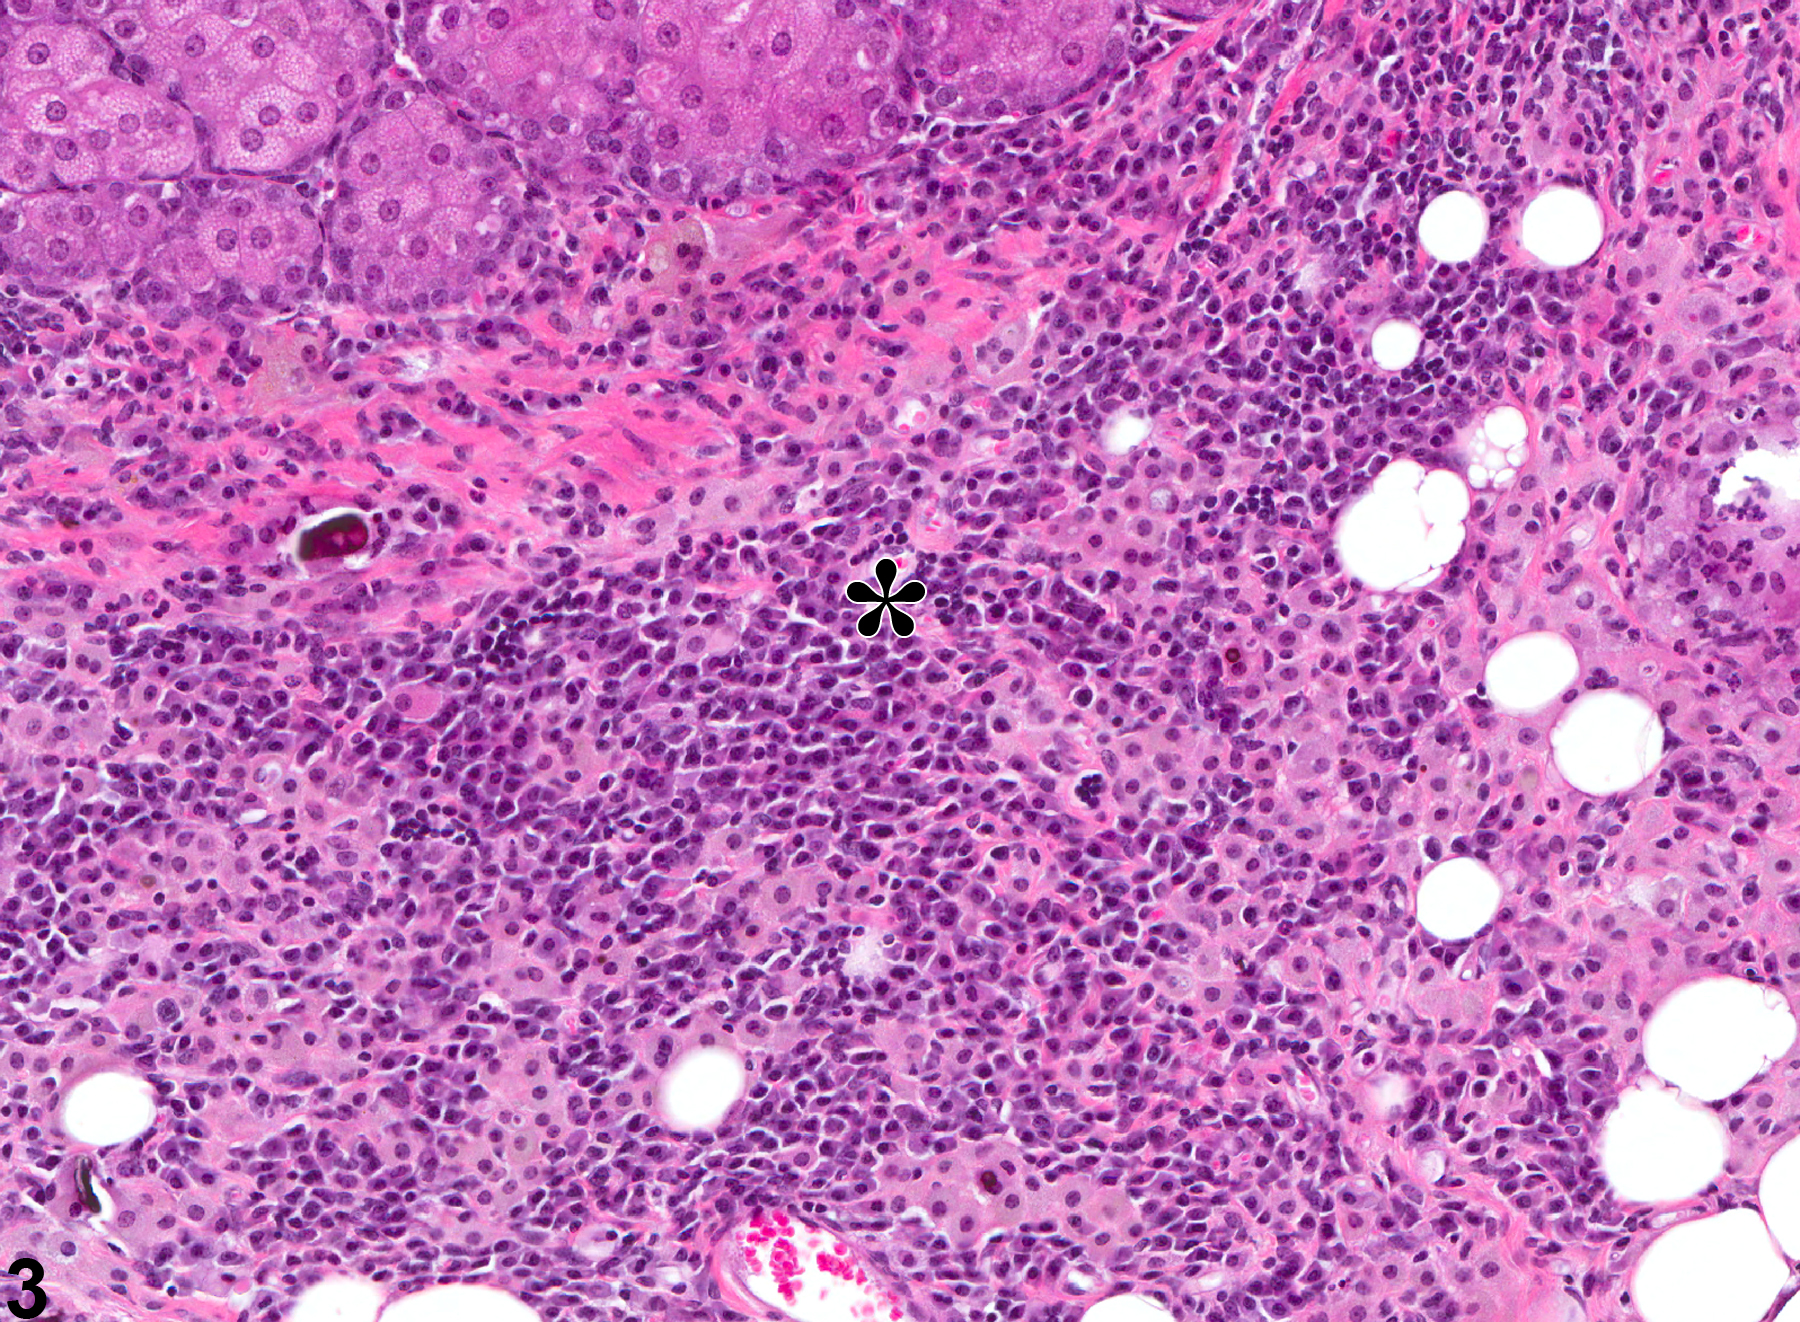 Image of inflammation in the preputial gland from a male B6C3F1 mouse in a chronic study